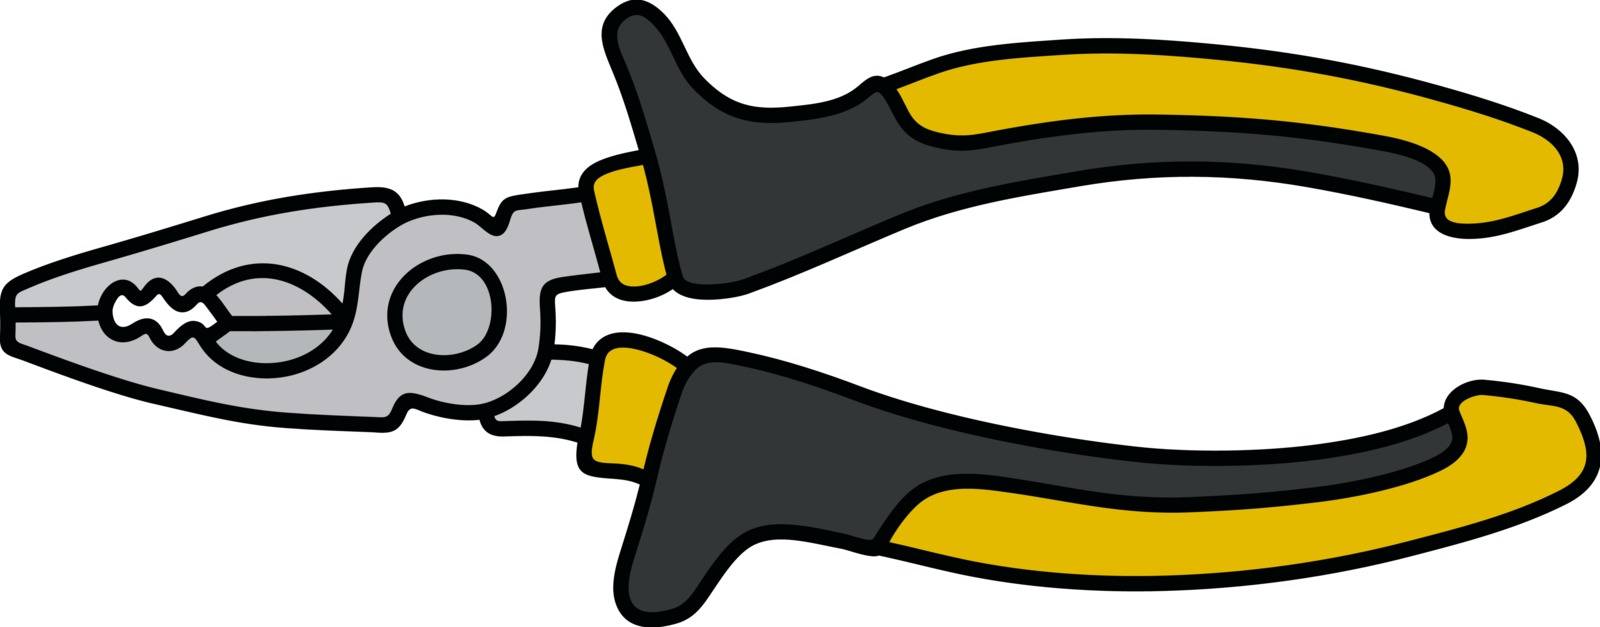 The combination pliers by vostal